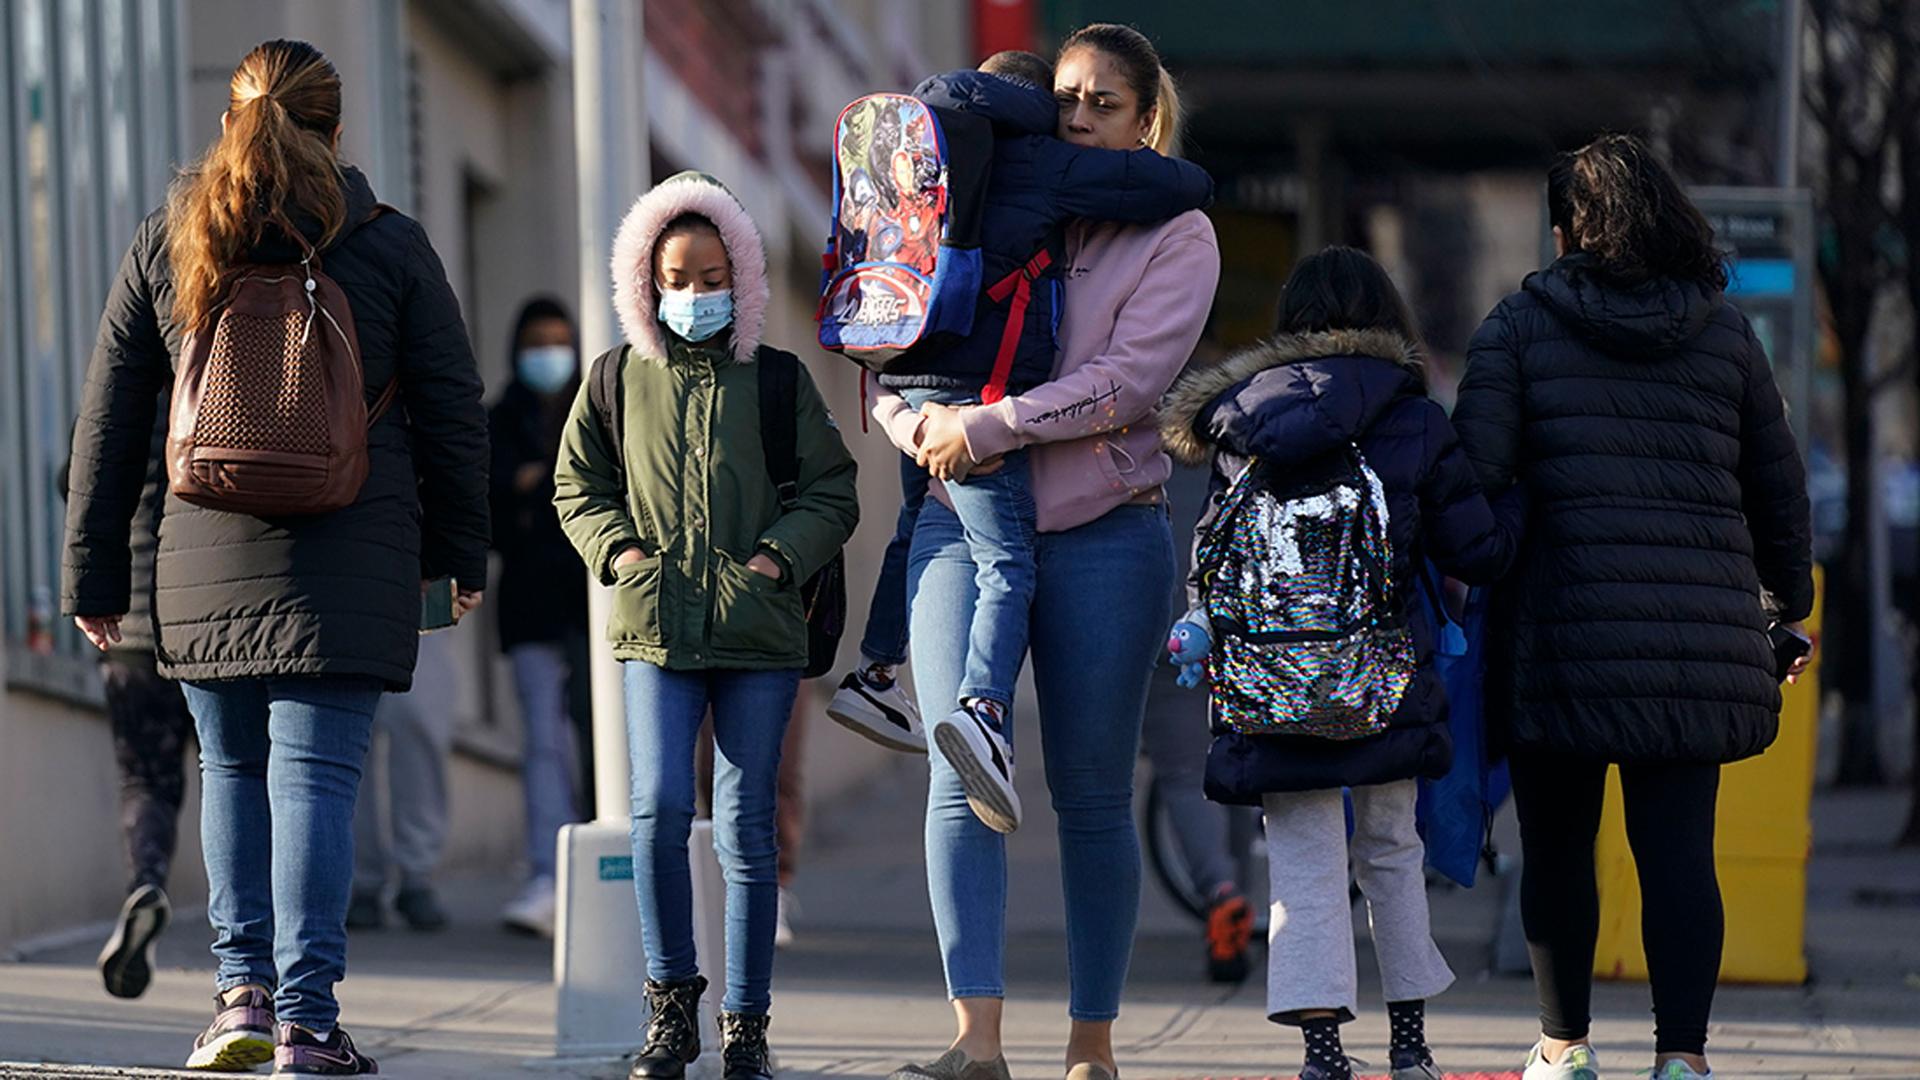 Children and their caregivers arrive for school in New York